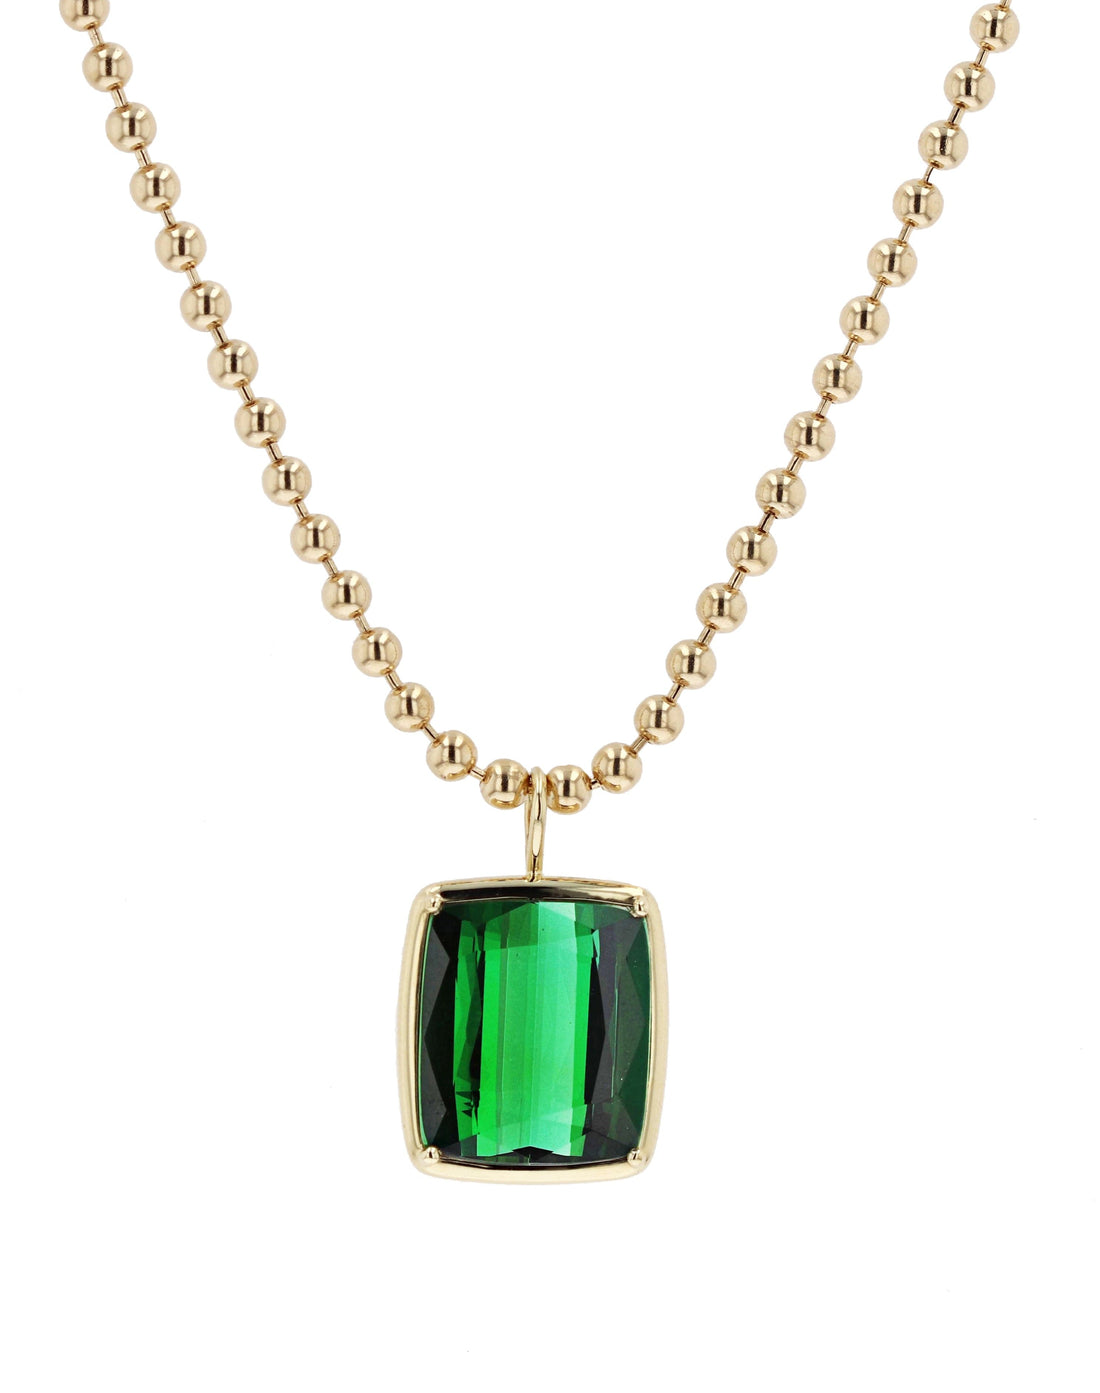 18K Gold Tourmaline Pendant Necklace- Skeie's Legacy Collection